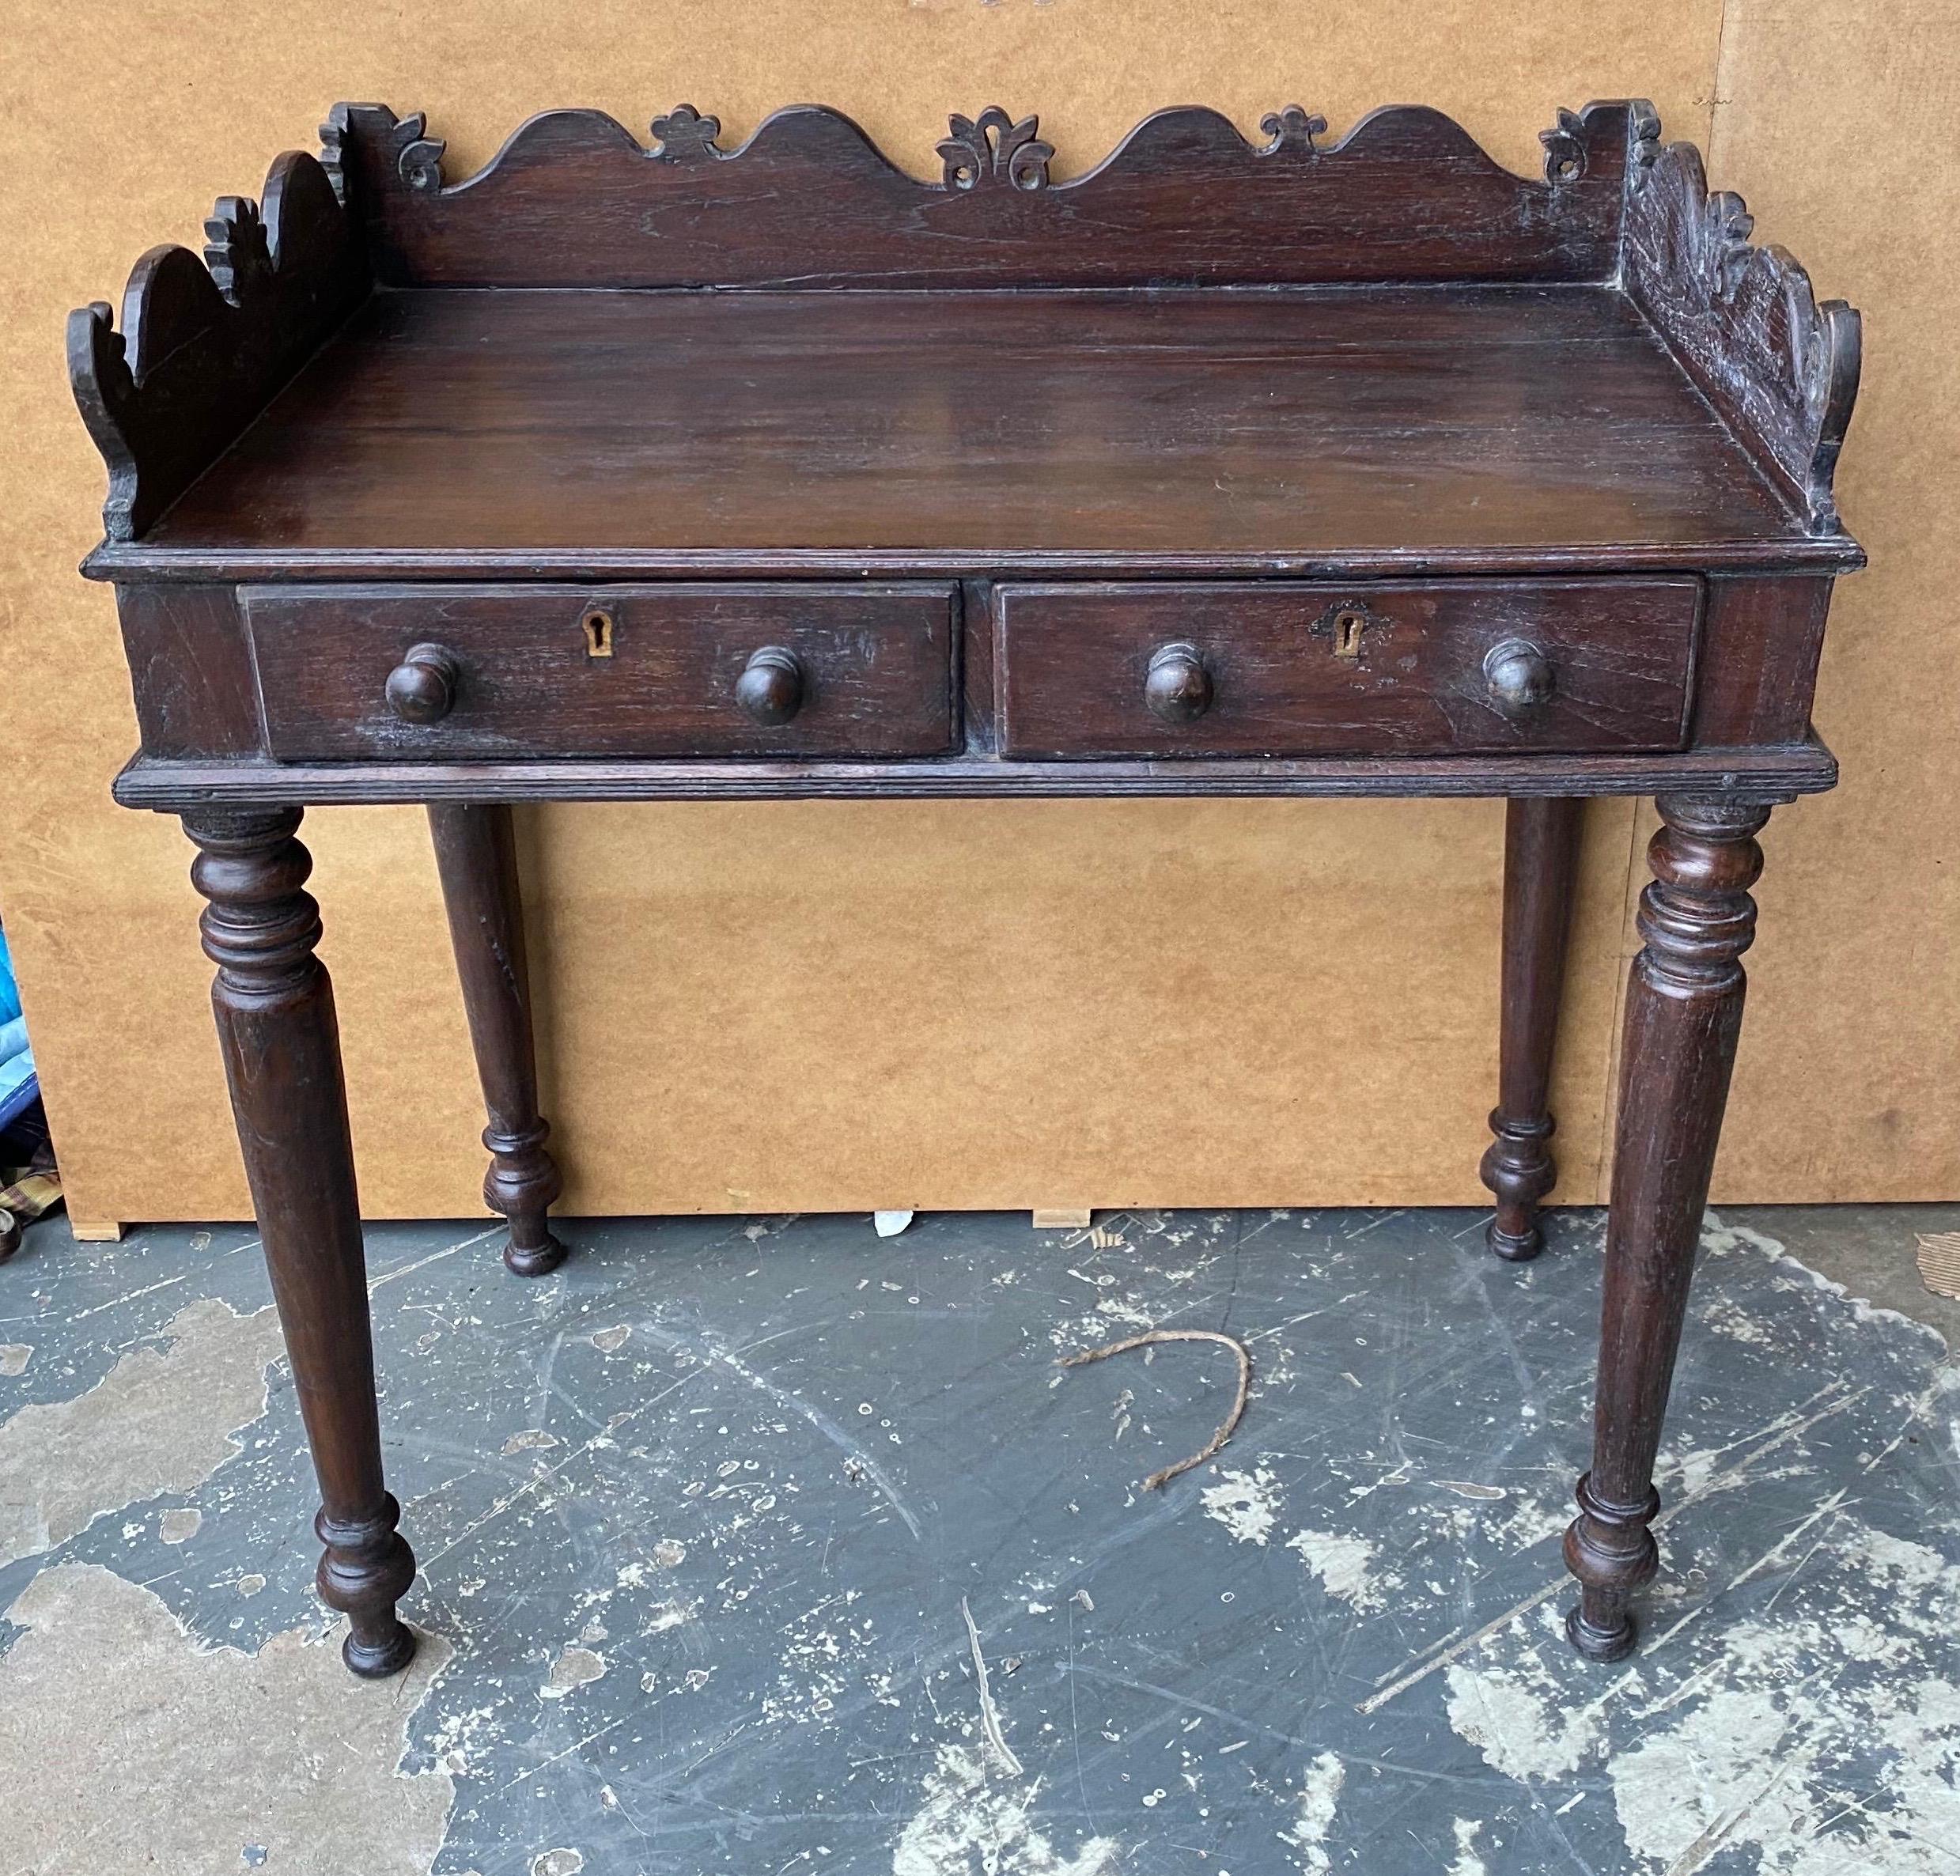 19th century British Colonial teak 2-drawer console from the East Indies.